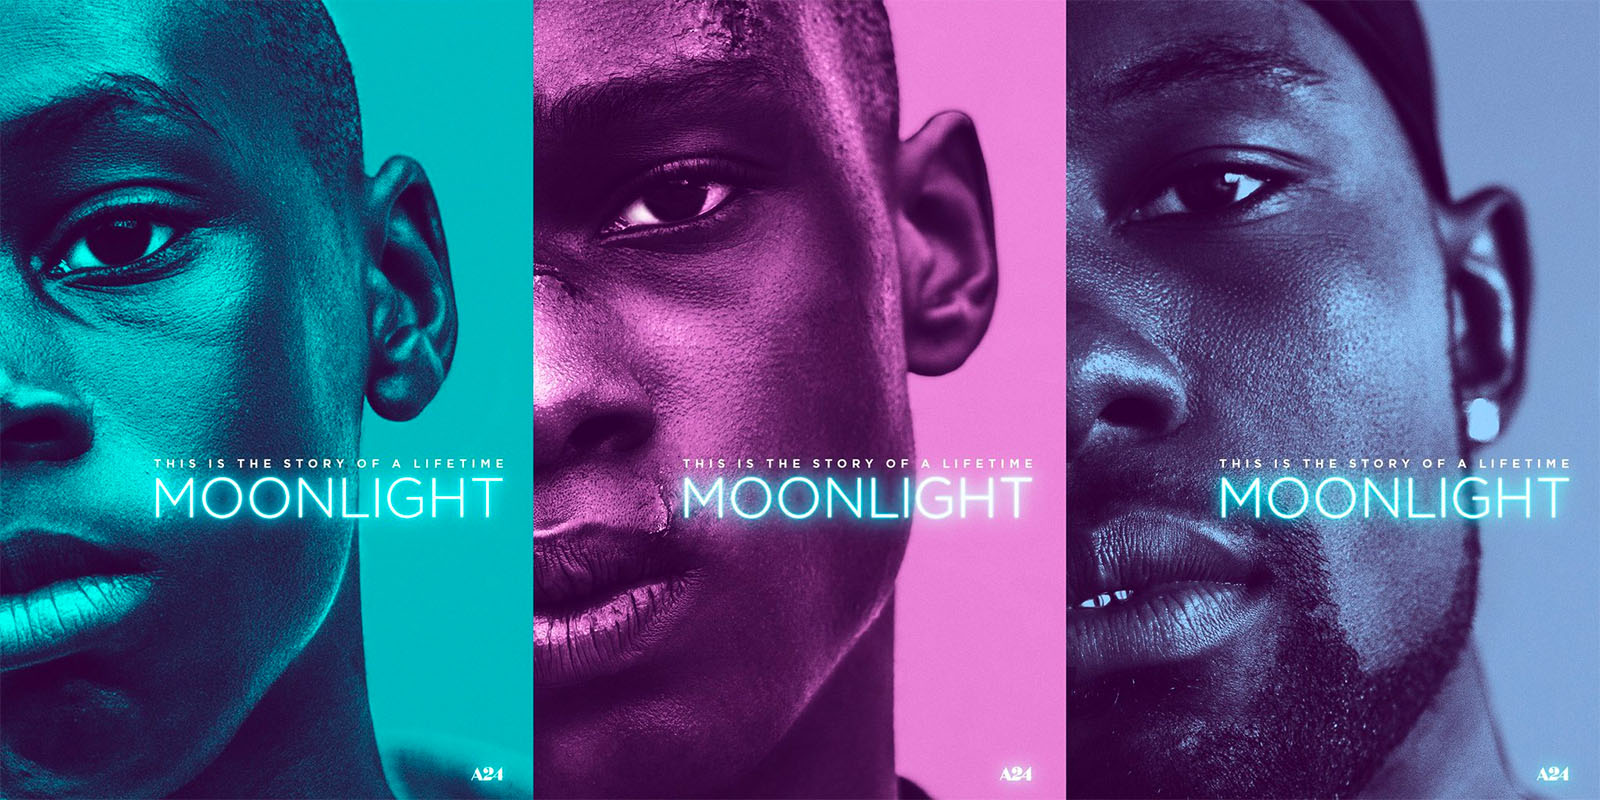 A24’s big bet on Black, Moonlight demonstrated a demand for bold stories.